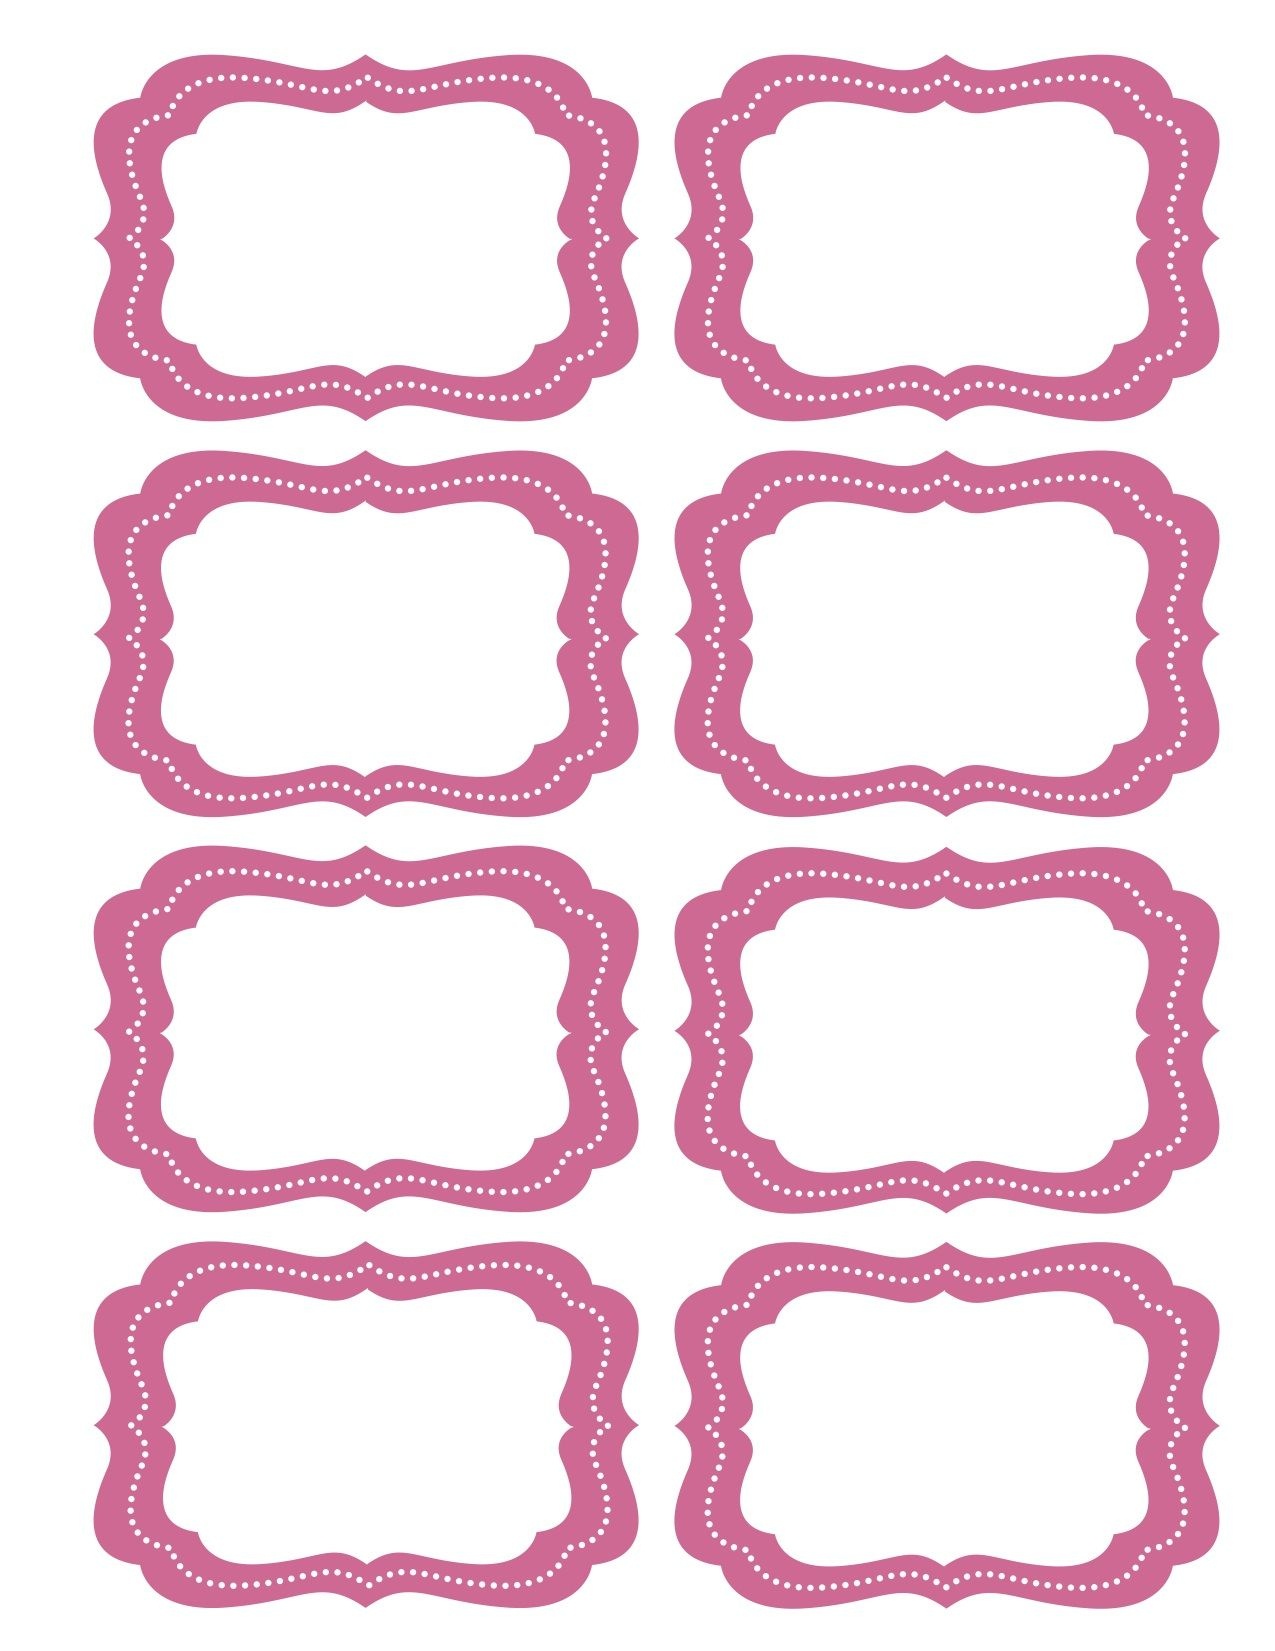 Free Printable Bag Label Templates | Candy Labels Blank Image - Free Editable Printable Labels